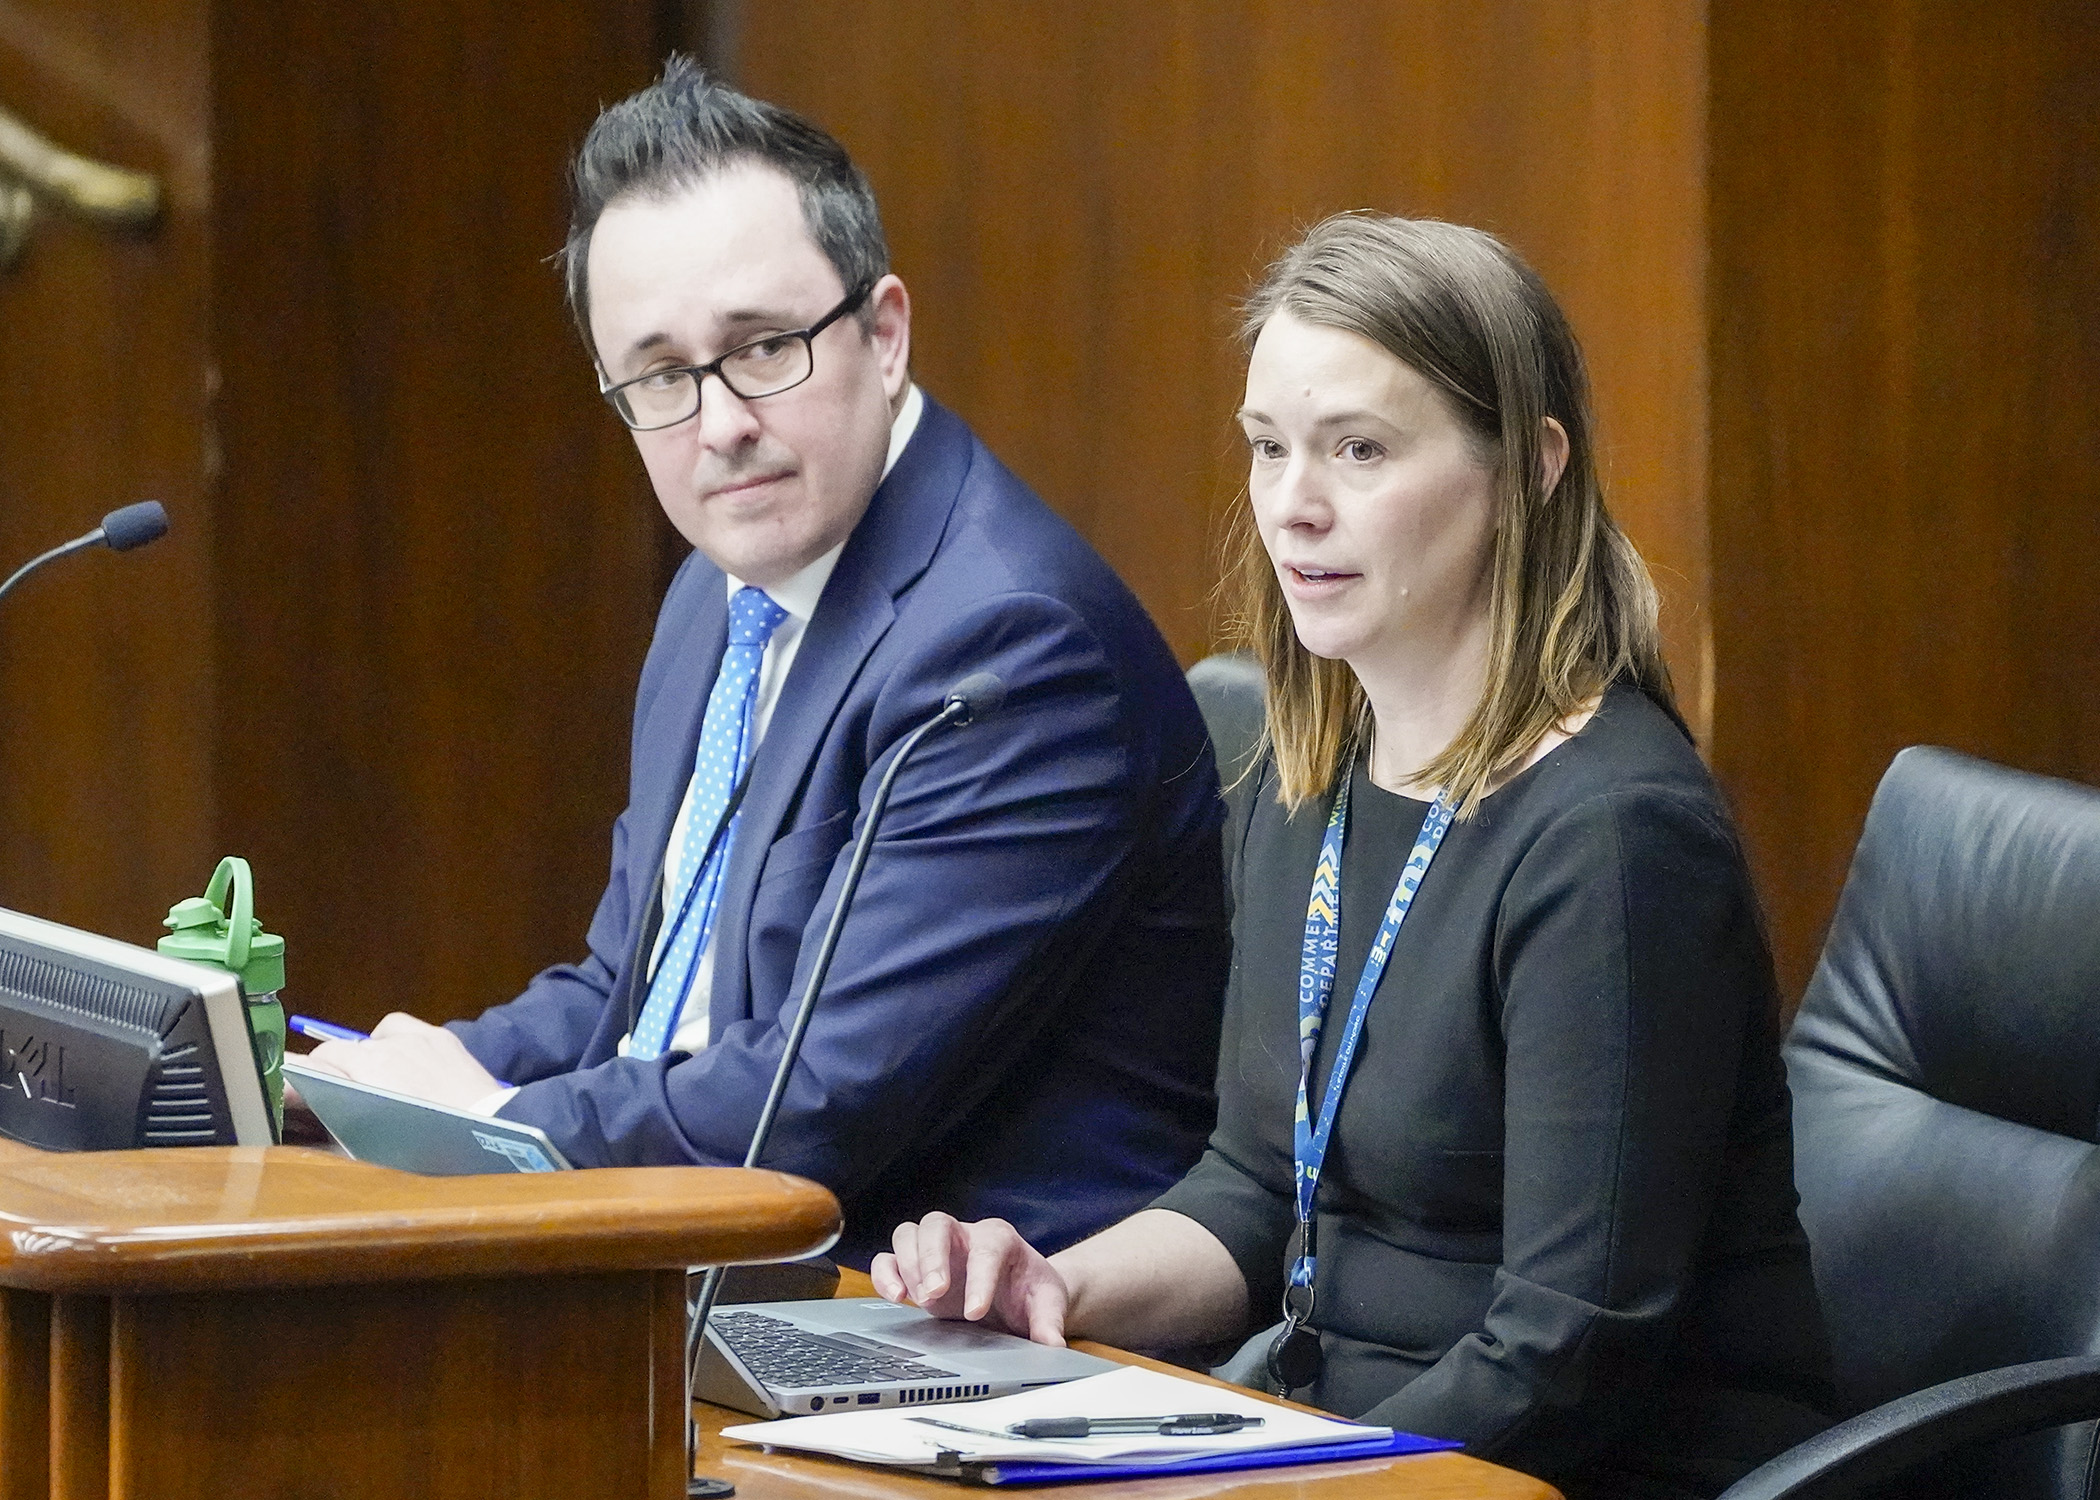 Peter Brickwedde, assistant commissioner of government and external affairs, and Julia Dreier, deputy commissioner for the Insurance Division, testify before the House Health Finance and Policy Committee Feb. 20. (Photo by Andrew VonBank)